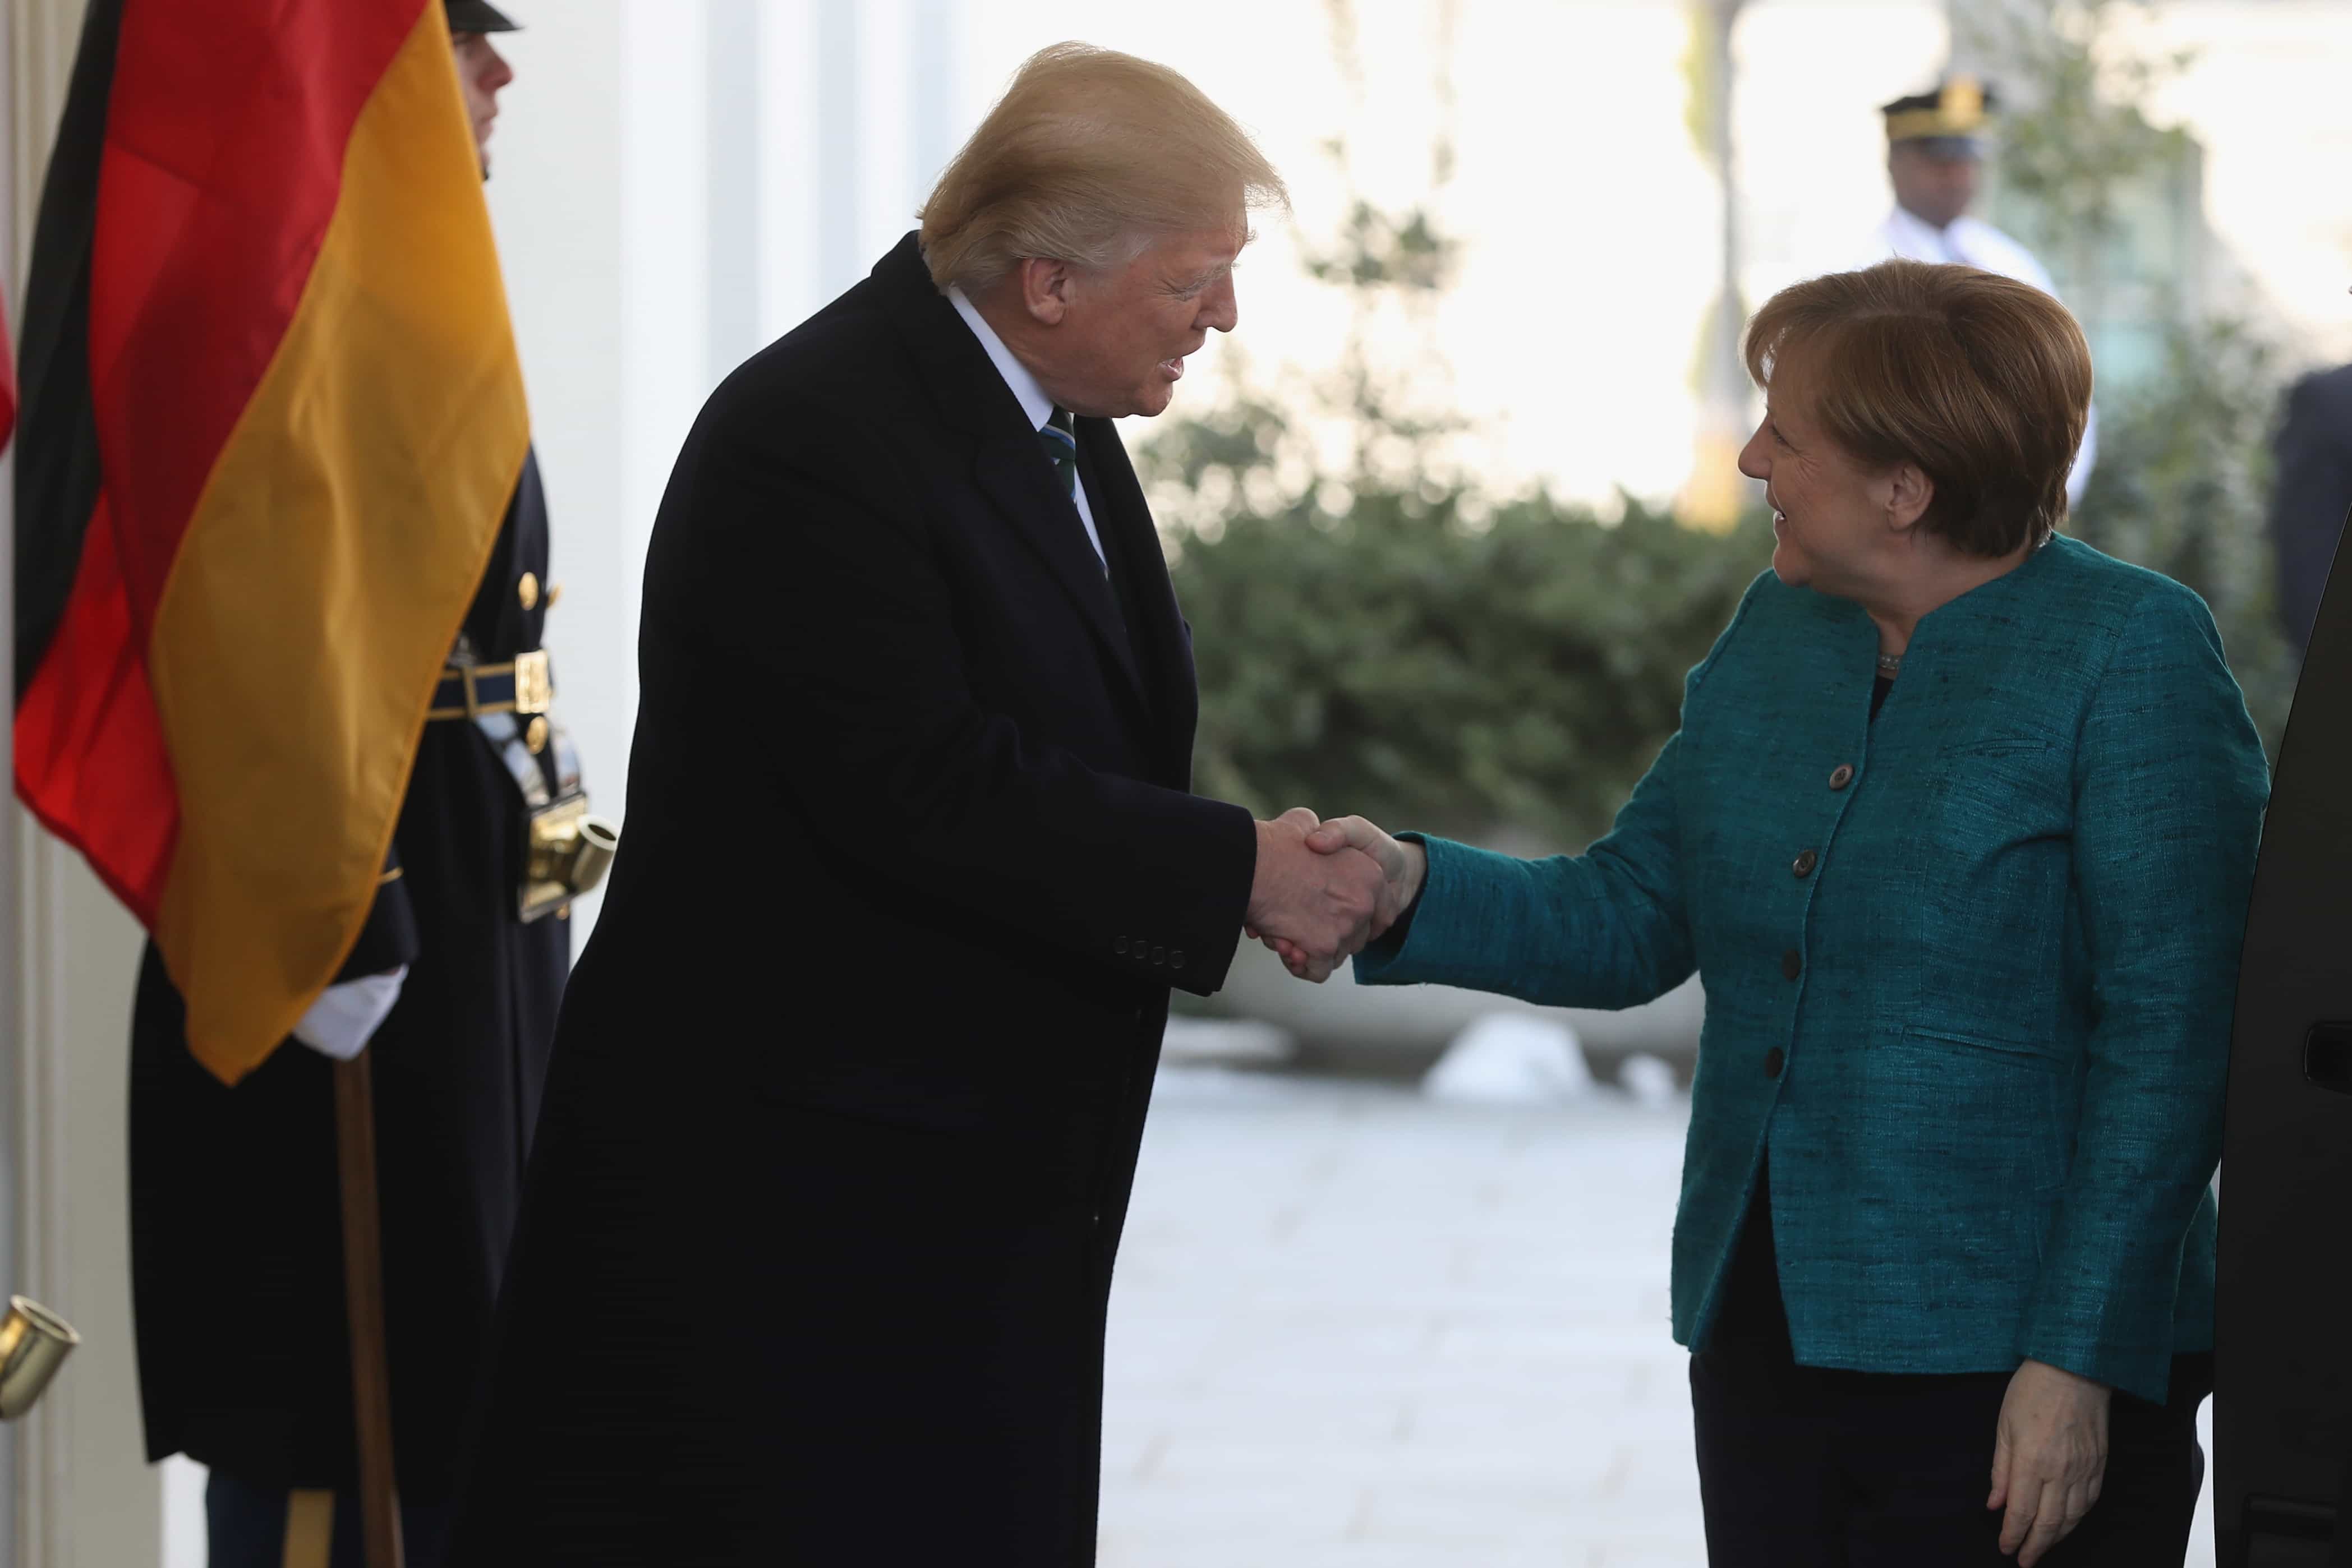 German Chancellor Angela Merkel Arrives To White House For Visit With President Trump